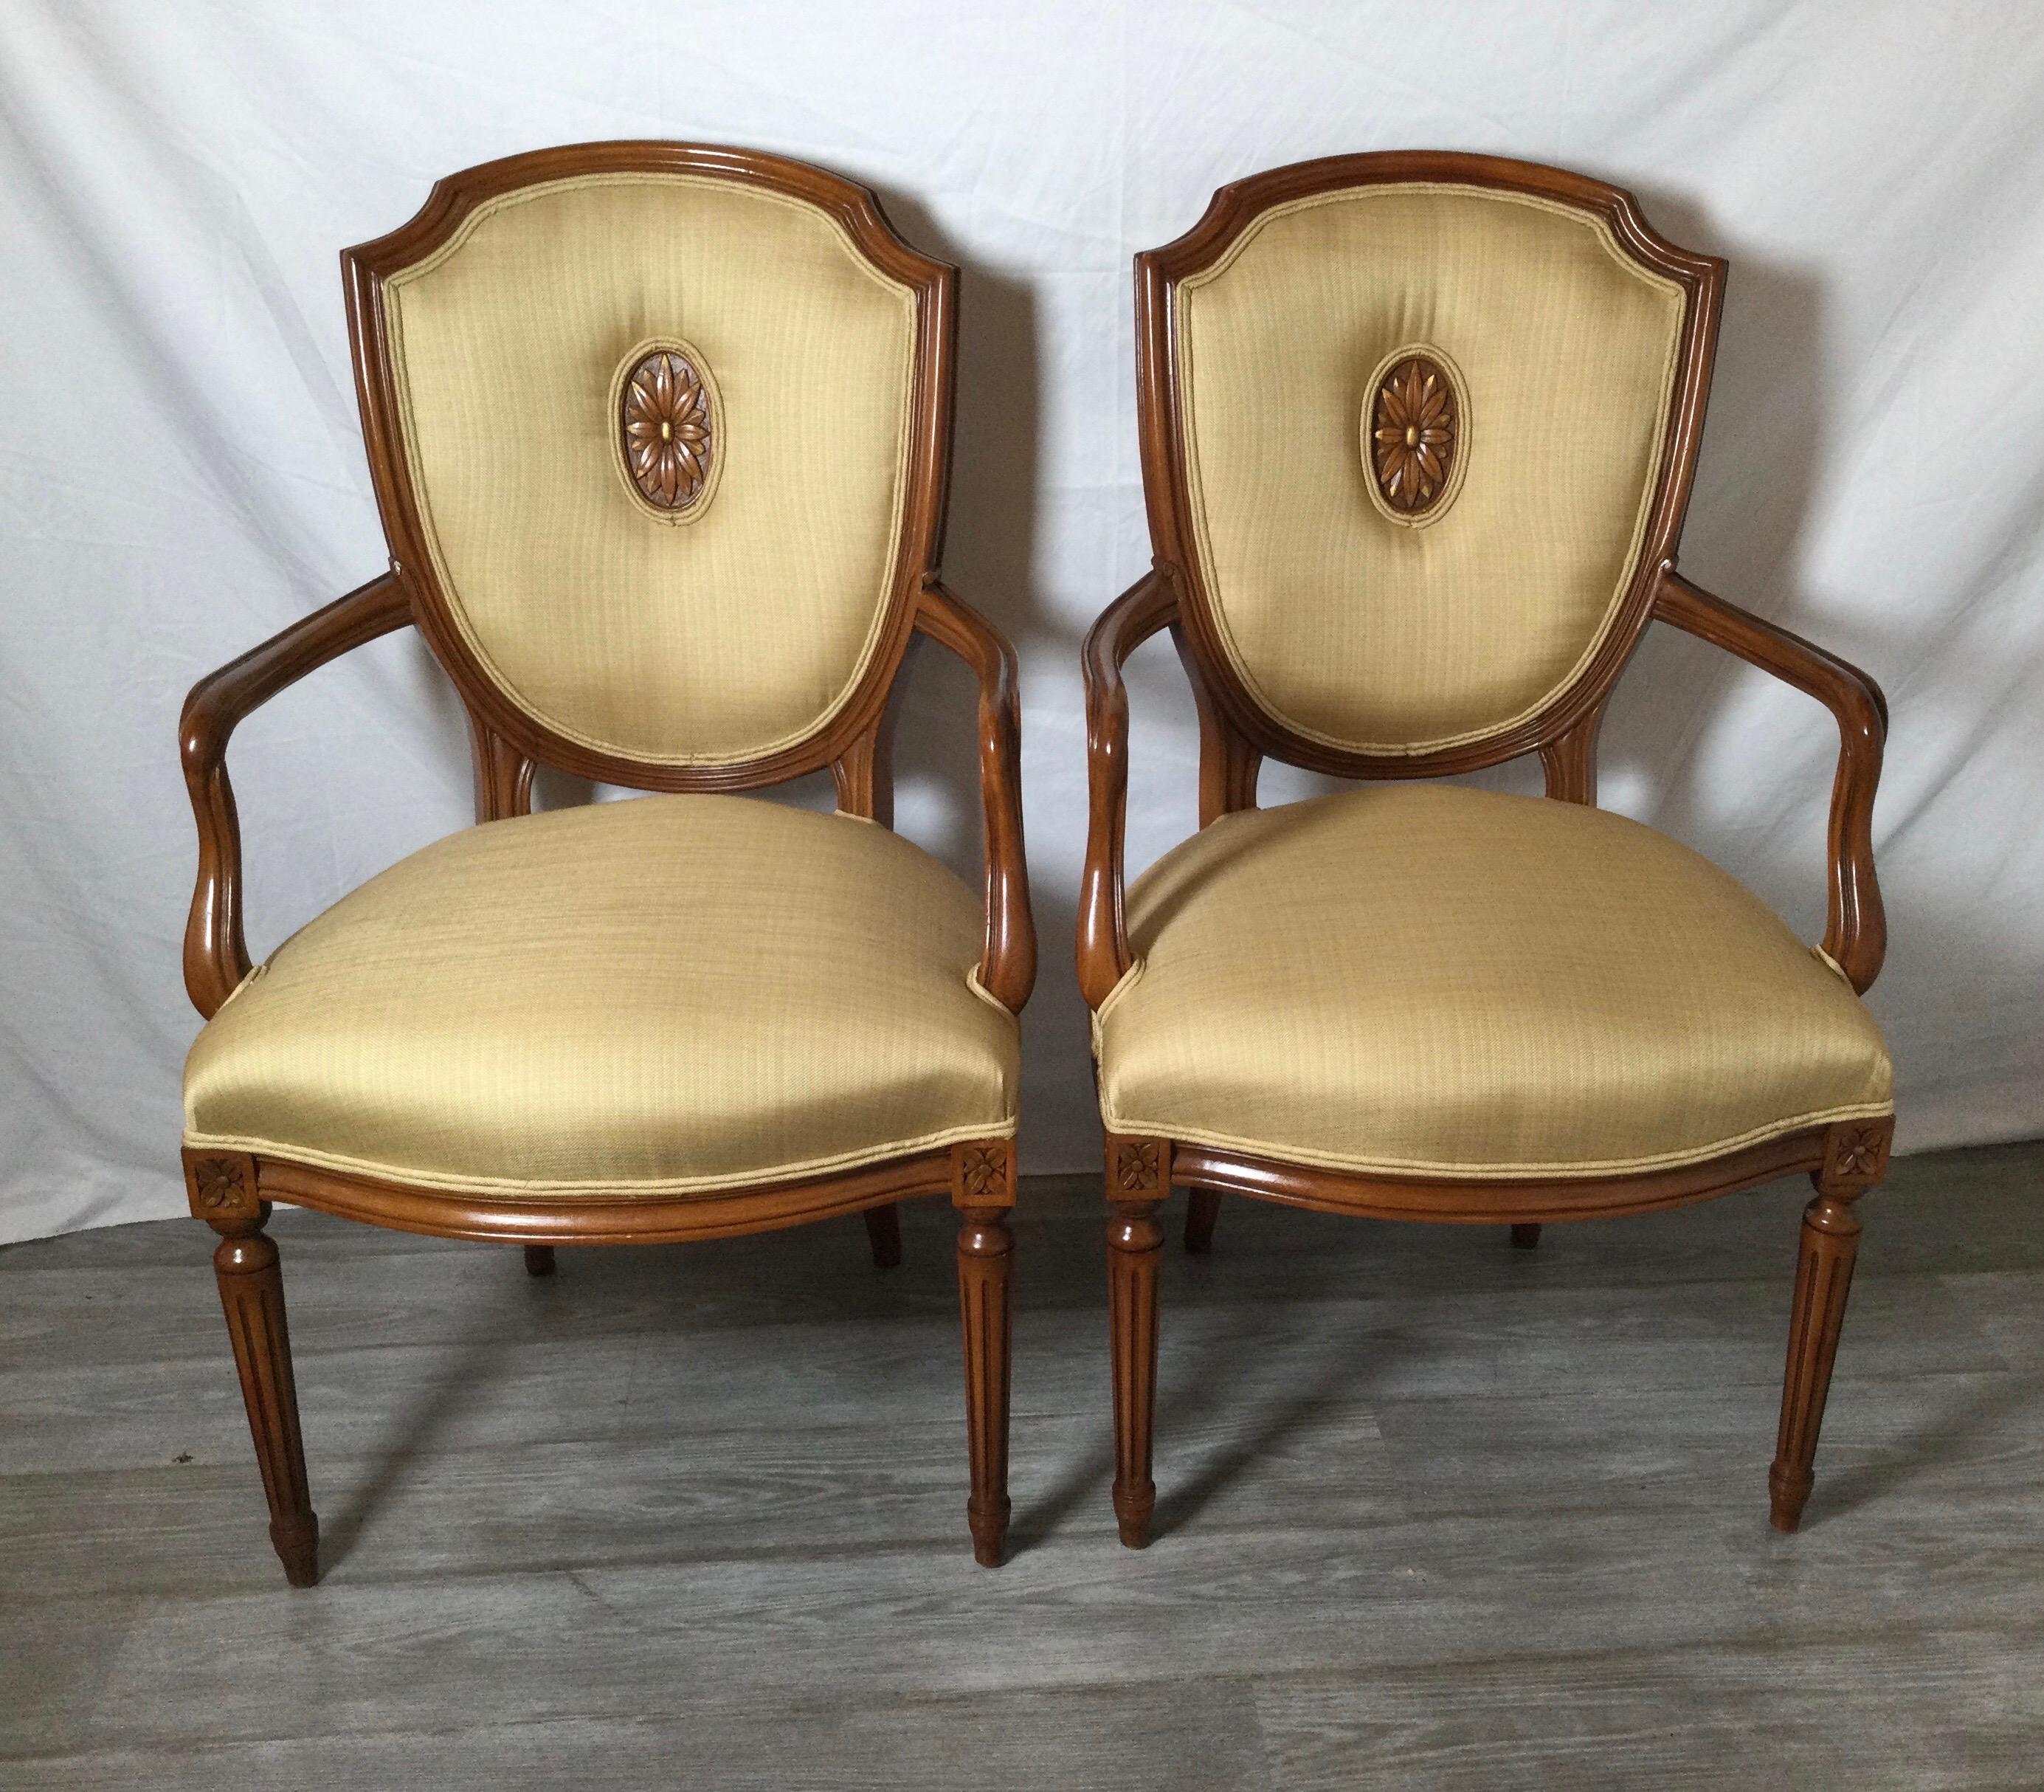 A pair of mid-20th century fruitwood shield back armchairs. The classically styled frames with hand carving in new light tan bronze woven linen fabric. The backs with a central caved wood inset.